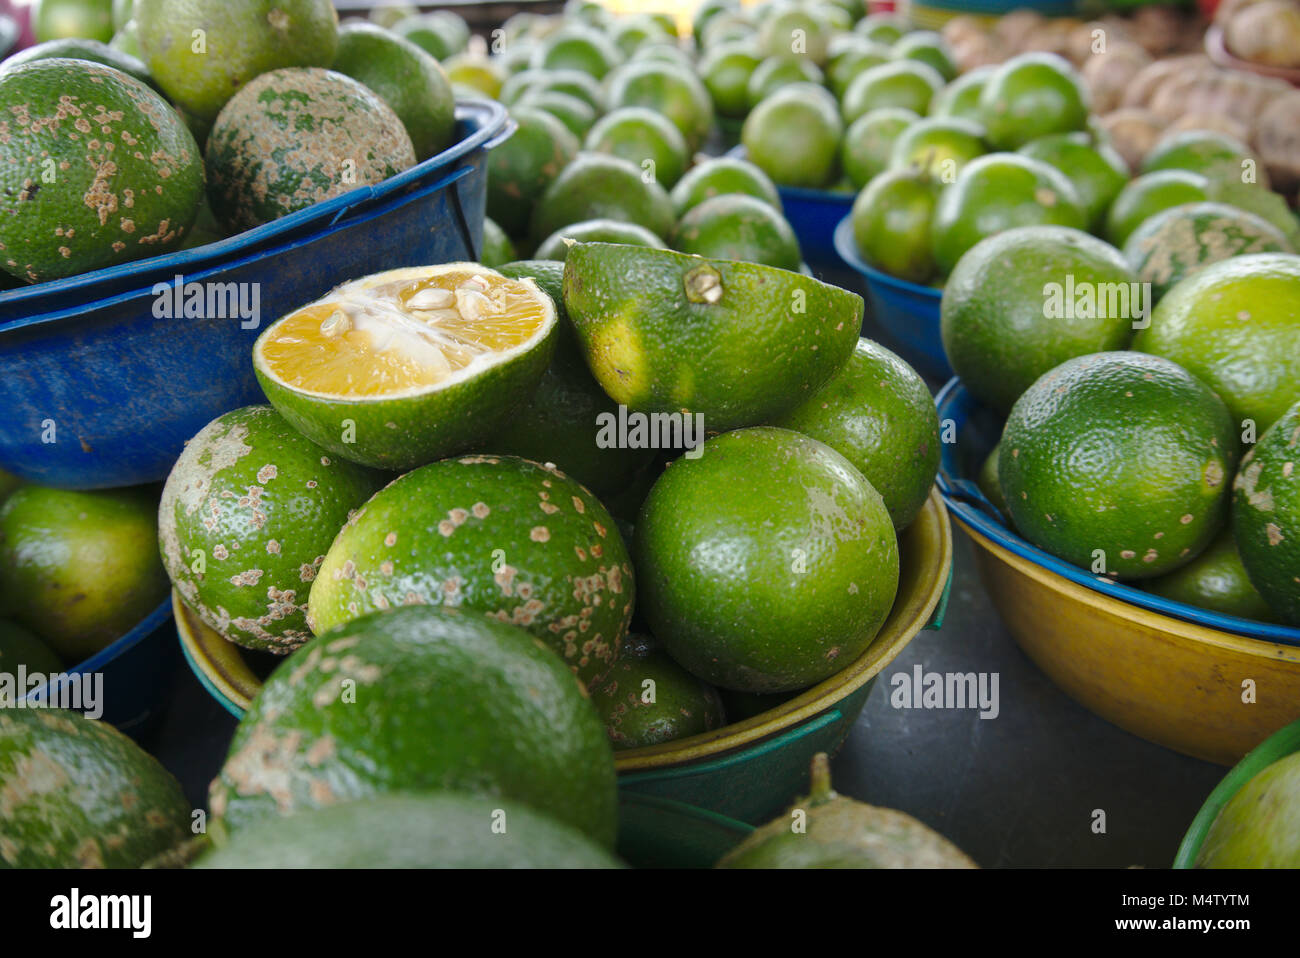 Lime on fruit bank at a farmers market stall. Stock Photo